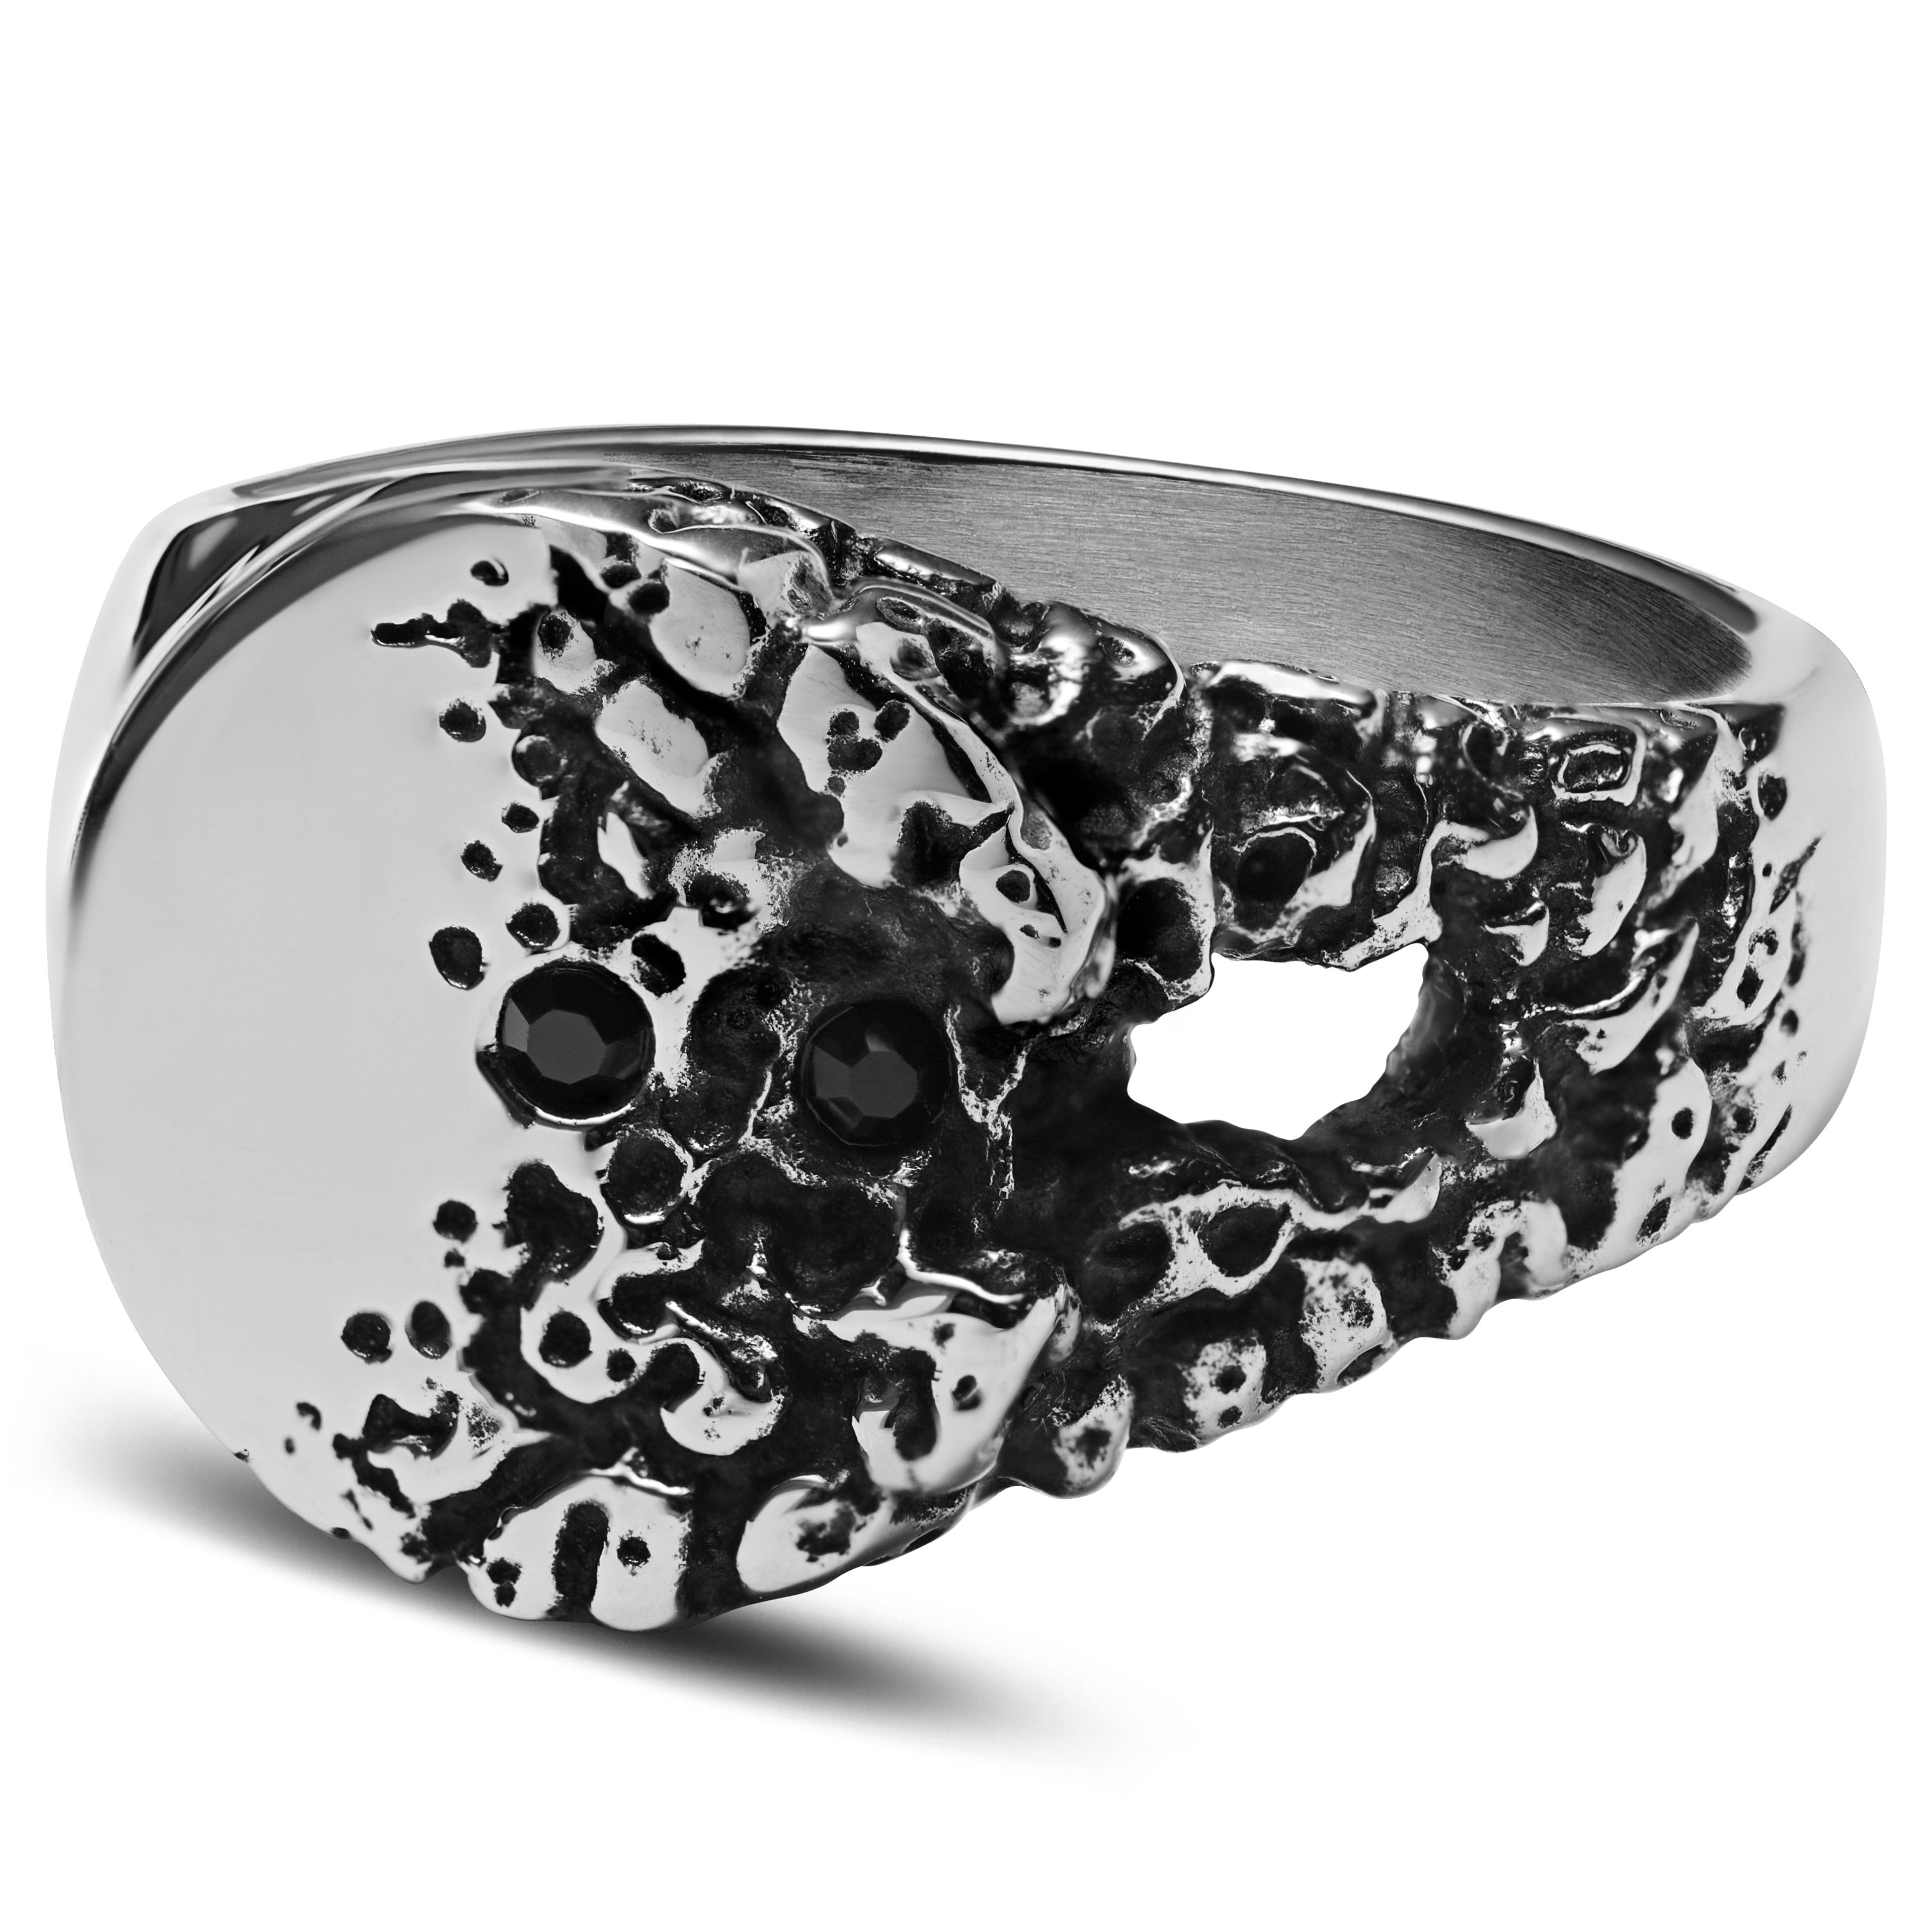 Orphic | Black Zirconia Volcanic Silver-Tone Stainless Steel Signet Ring 